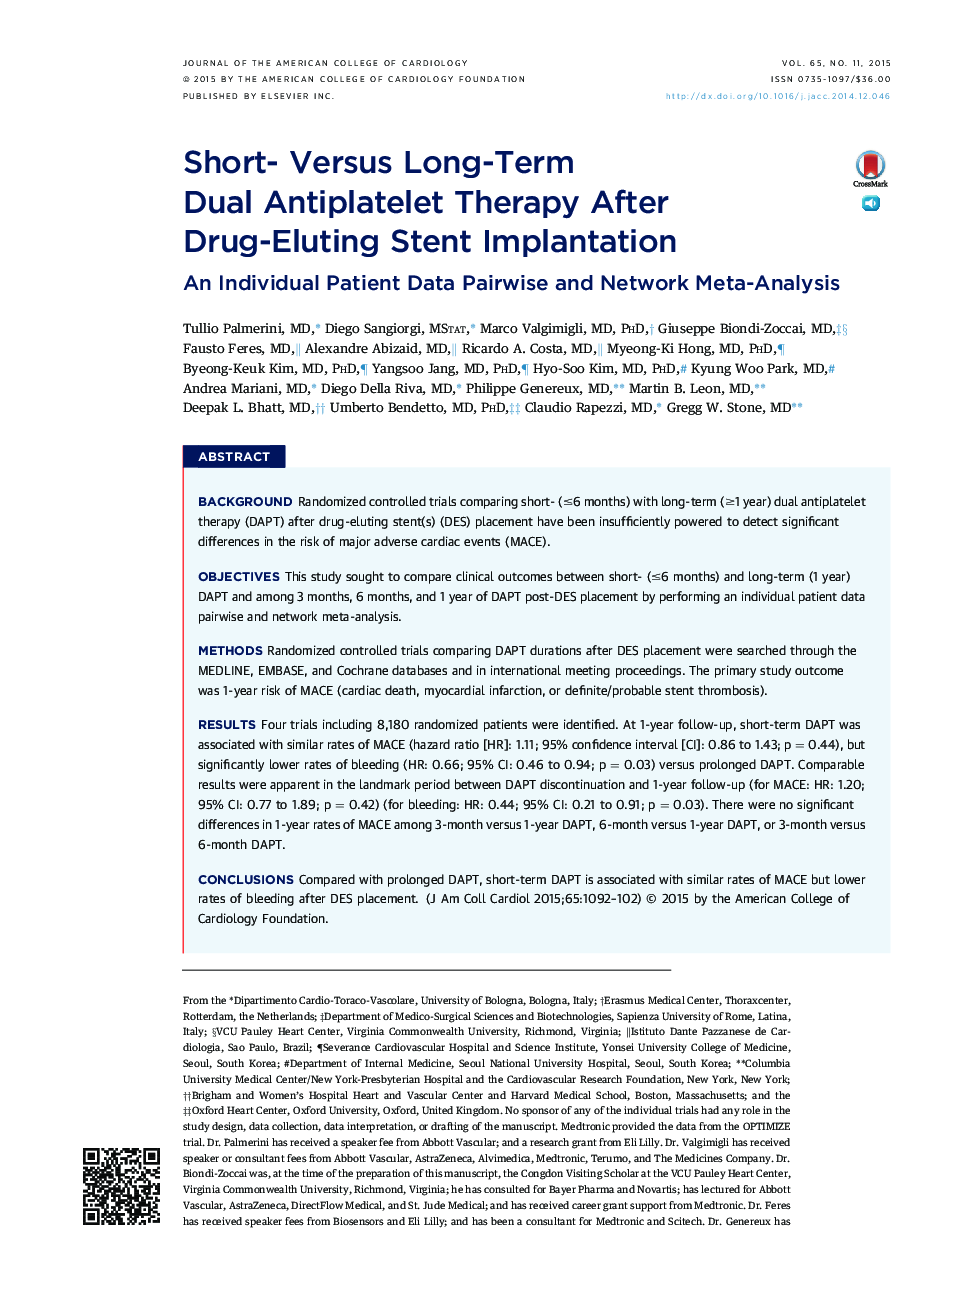 Short- Versus Long-Term Dual Antiplatelet Therapy After Drug-Eluting Stent Implantation : An Individual Patient Data Pairwise and Network Meta-Analysis